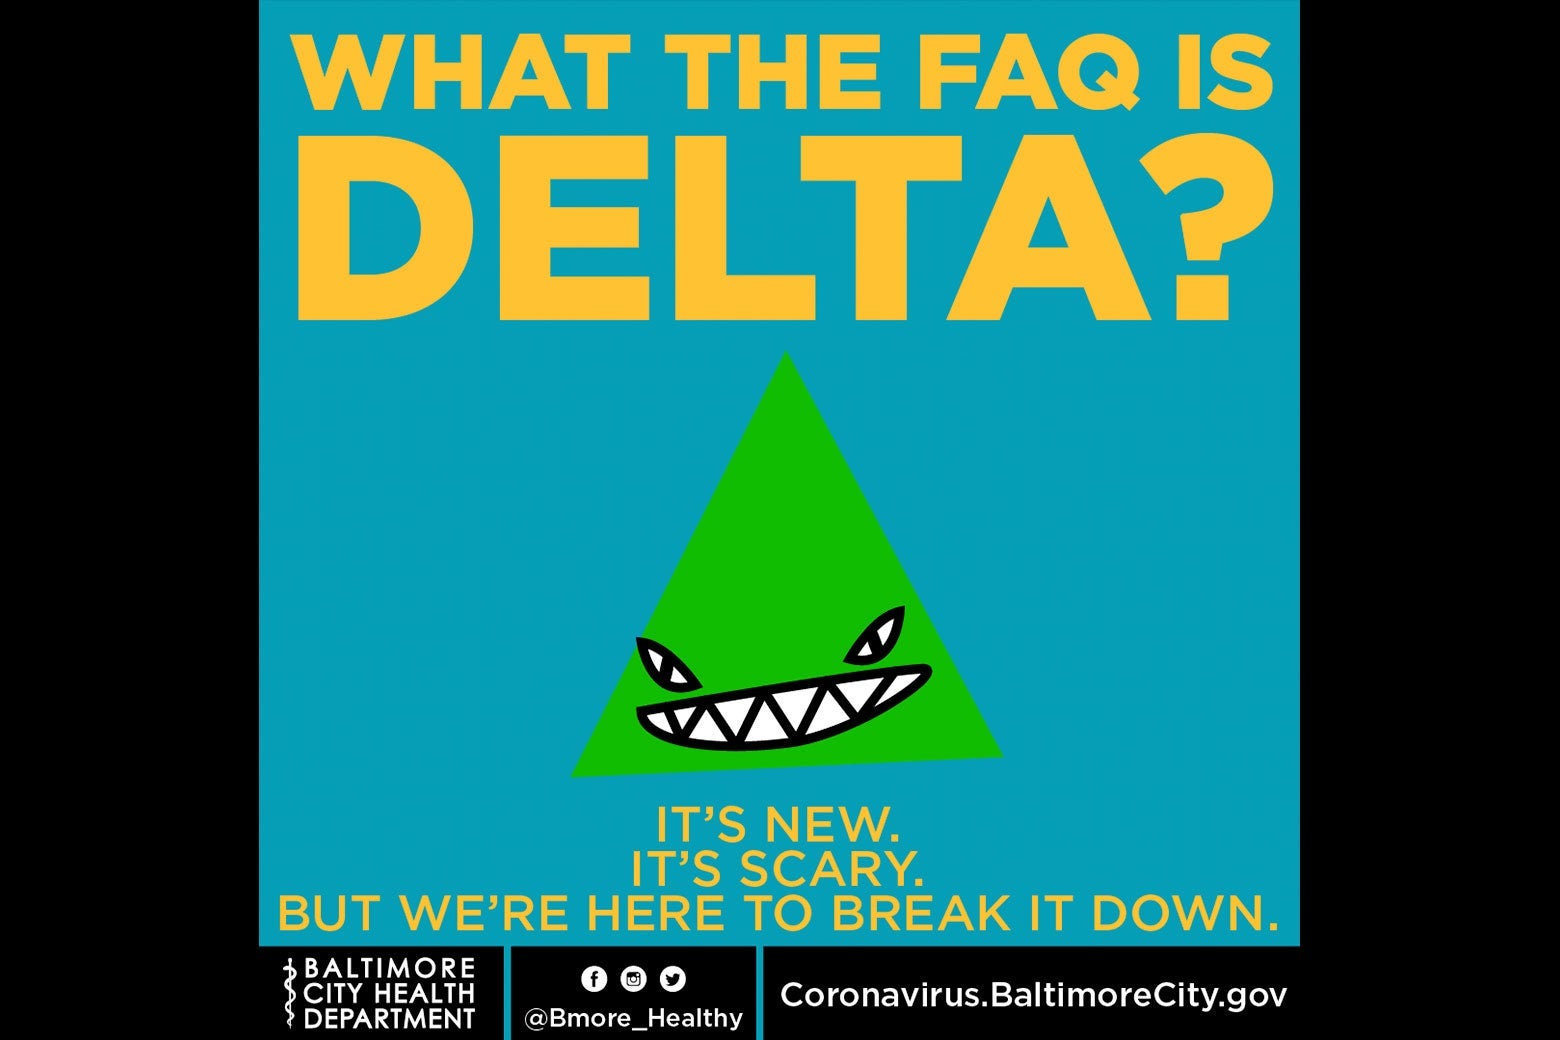 An ad that says "What the FAQ Is Delta?"